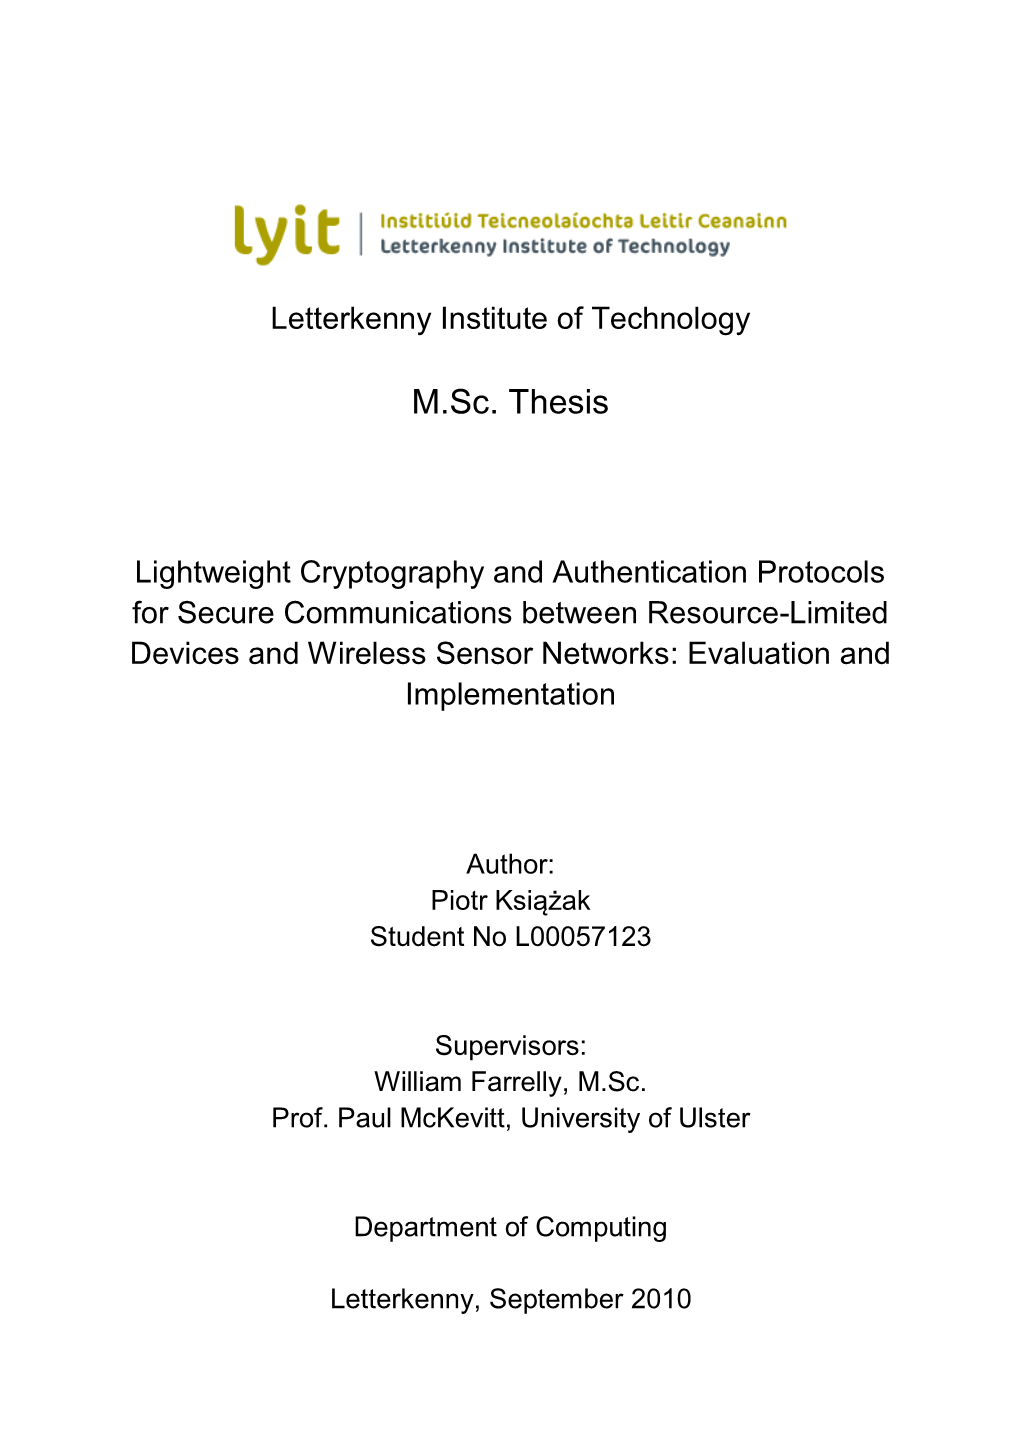 Lightweight Cryptography and Authentication Protocols for Secure